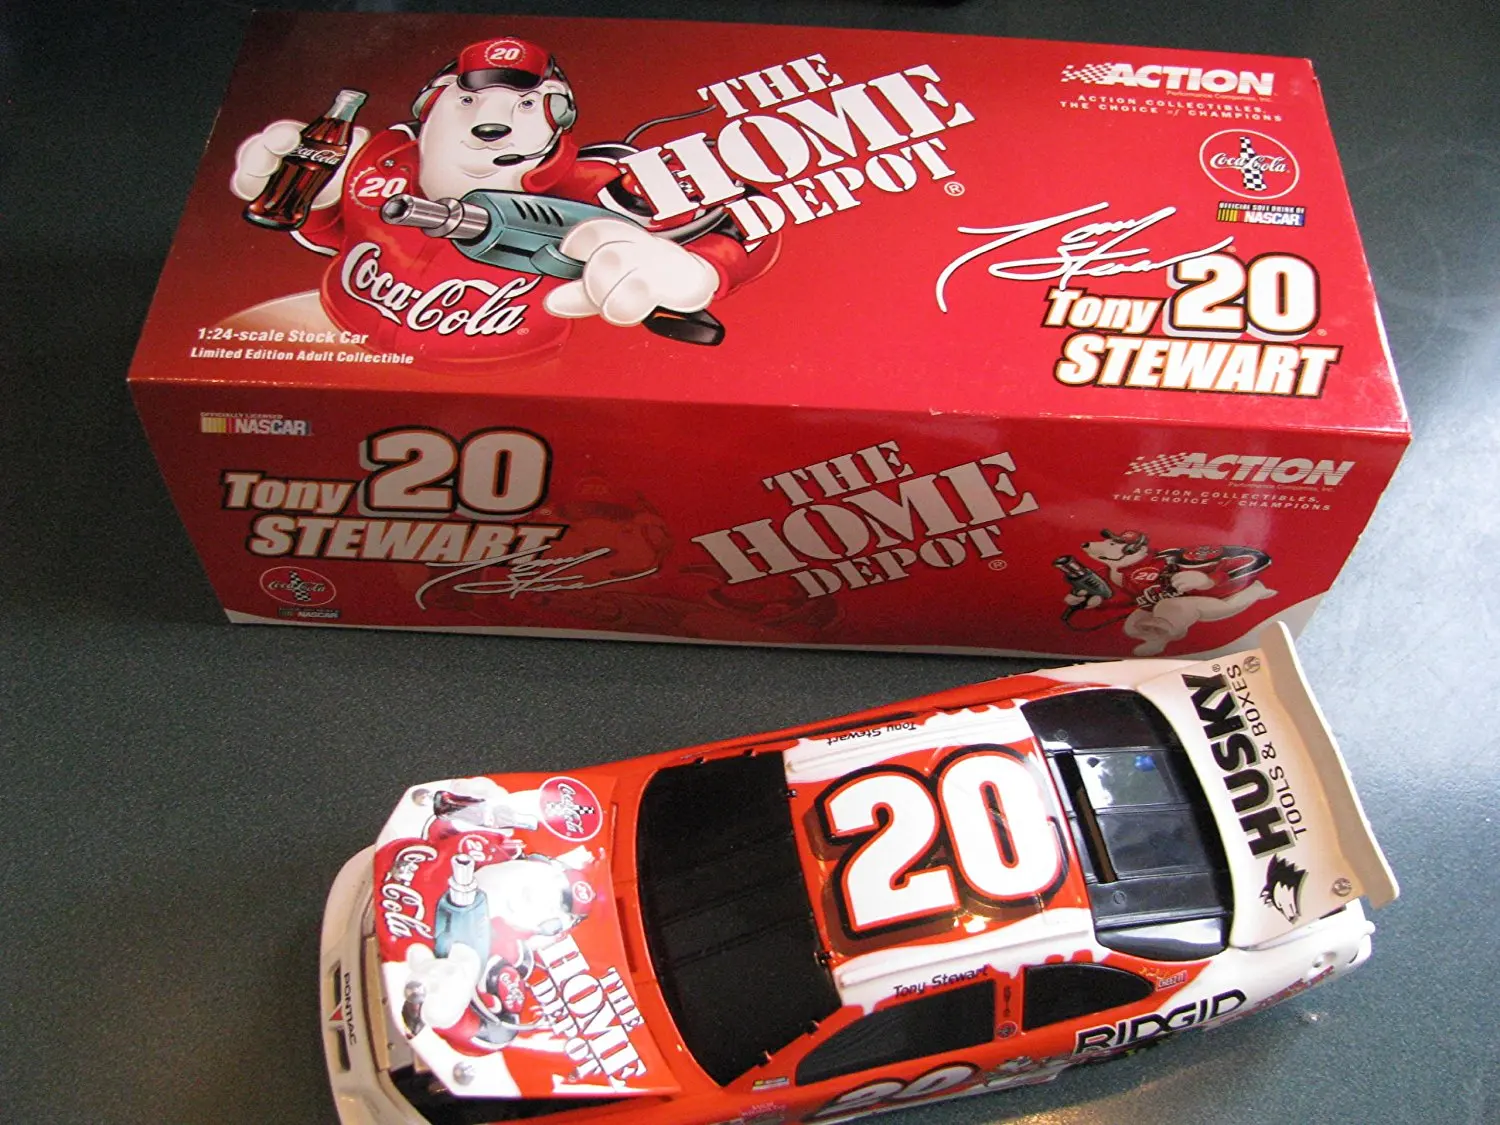 Tony Stewart #14 Old Spice Office Depot Impala SS Hood Opens 1//64 Scale Action Racing Collectable Only 6590 Made!